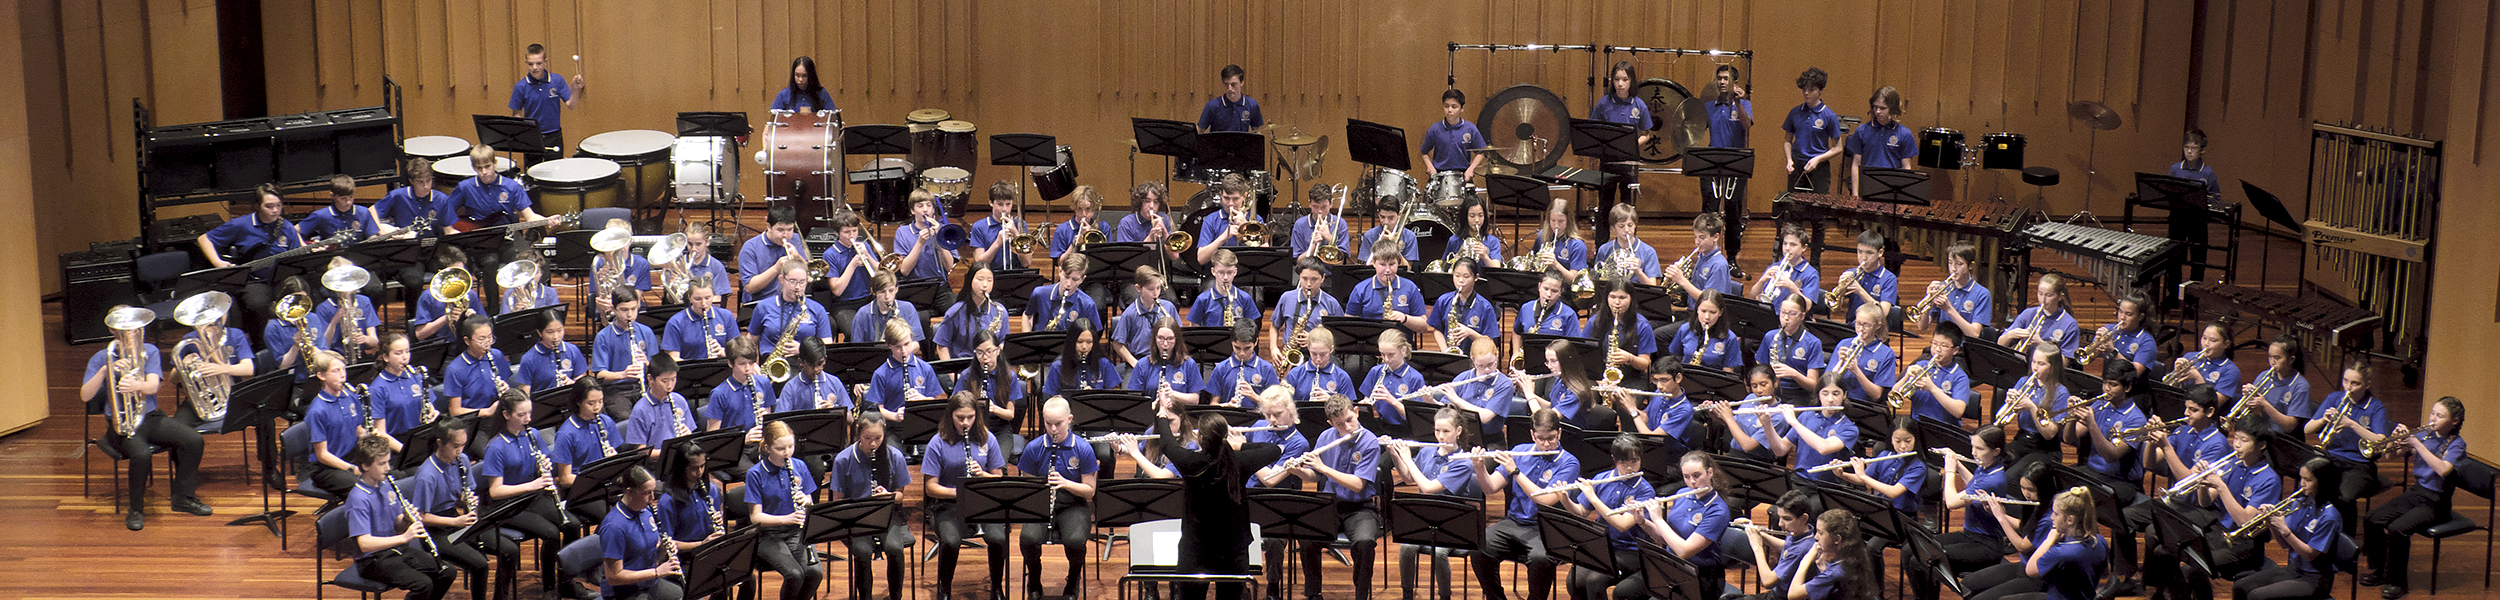 National Eisteddfod 2019 - Bands and Orchestras. Section BHS3 – ACT High School Bands (Intermediate). Lyneham High School Year 8 Concert Band. Photo by Peter Hislop